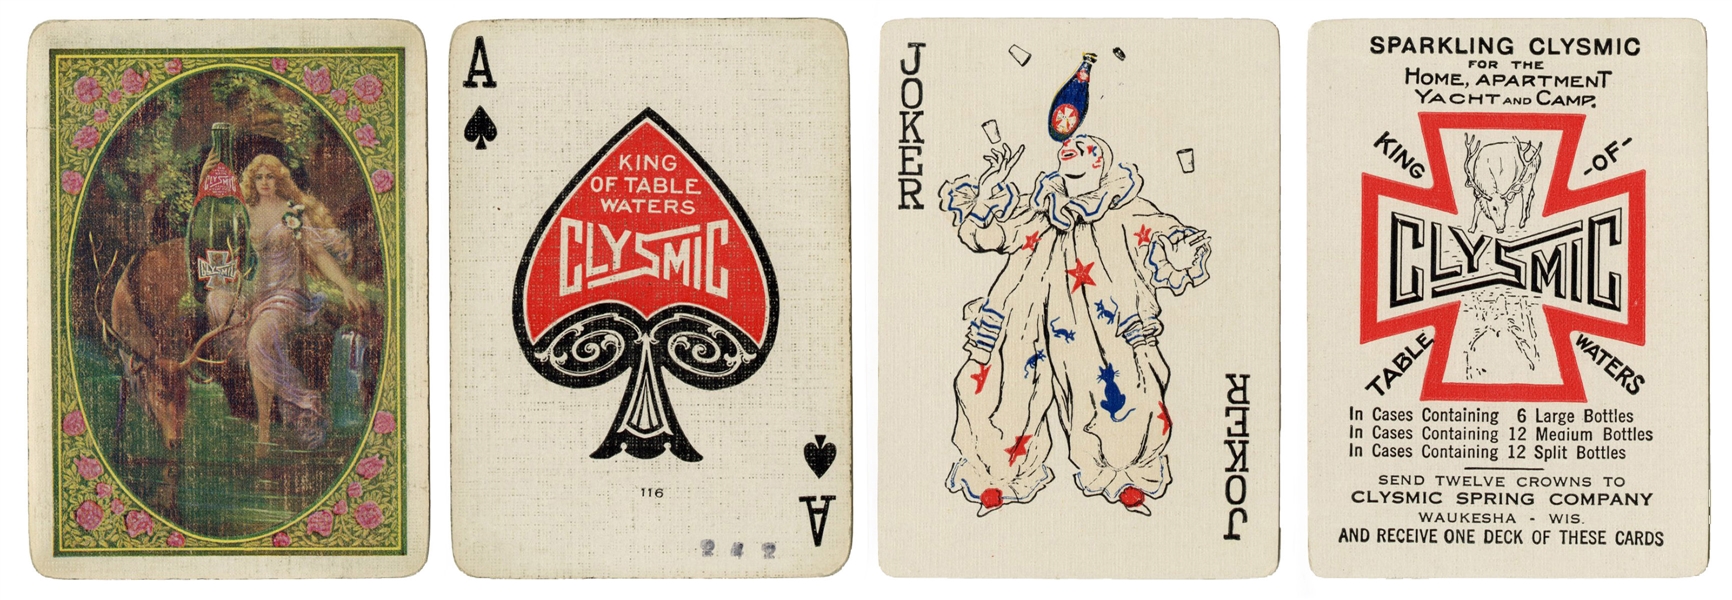  Clysmic King of Table Waters Advertising Playing Cards. Wau...